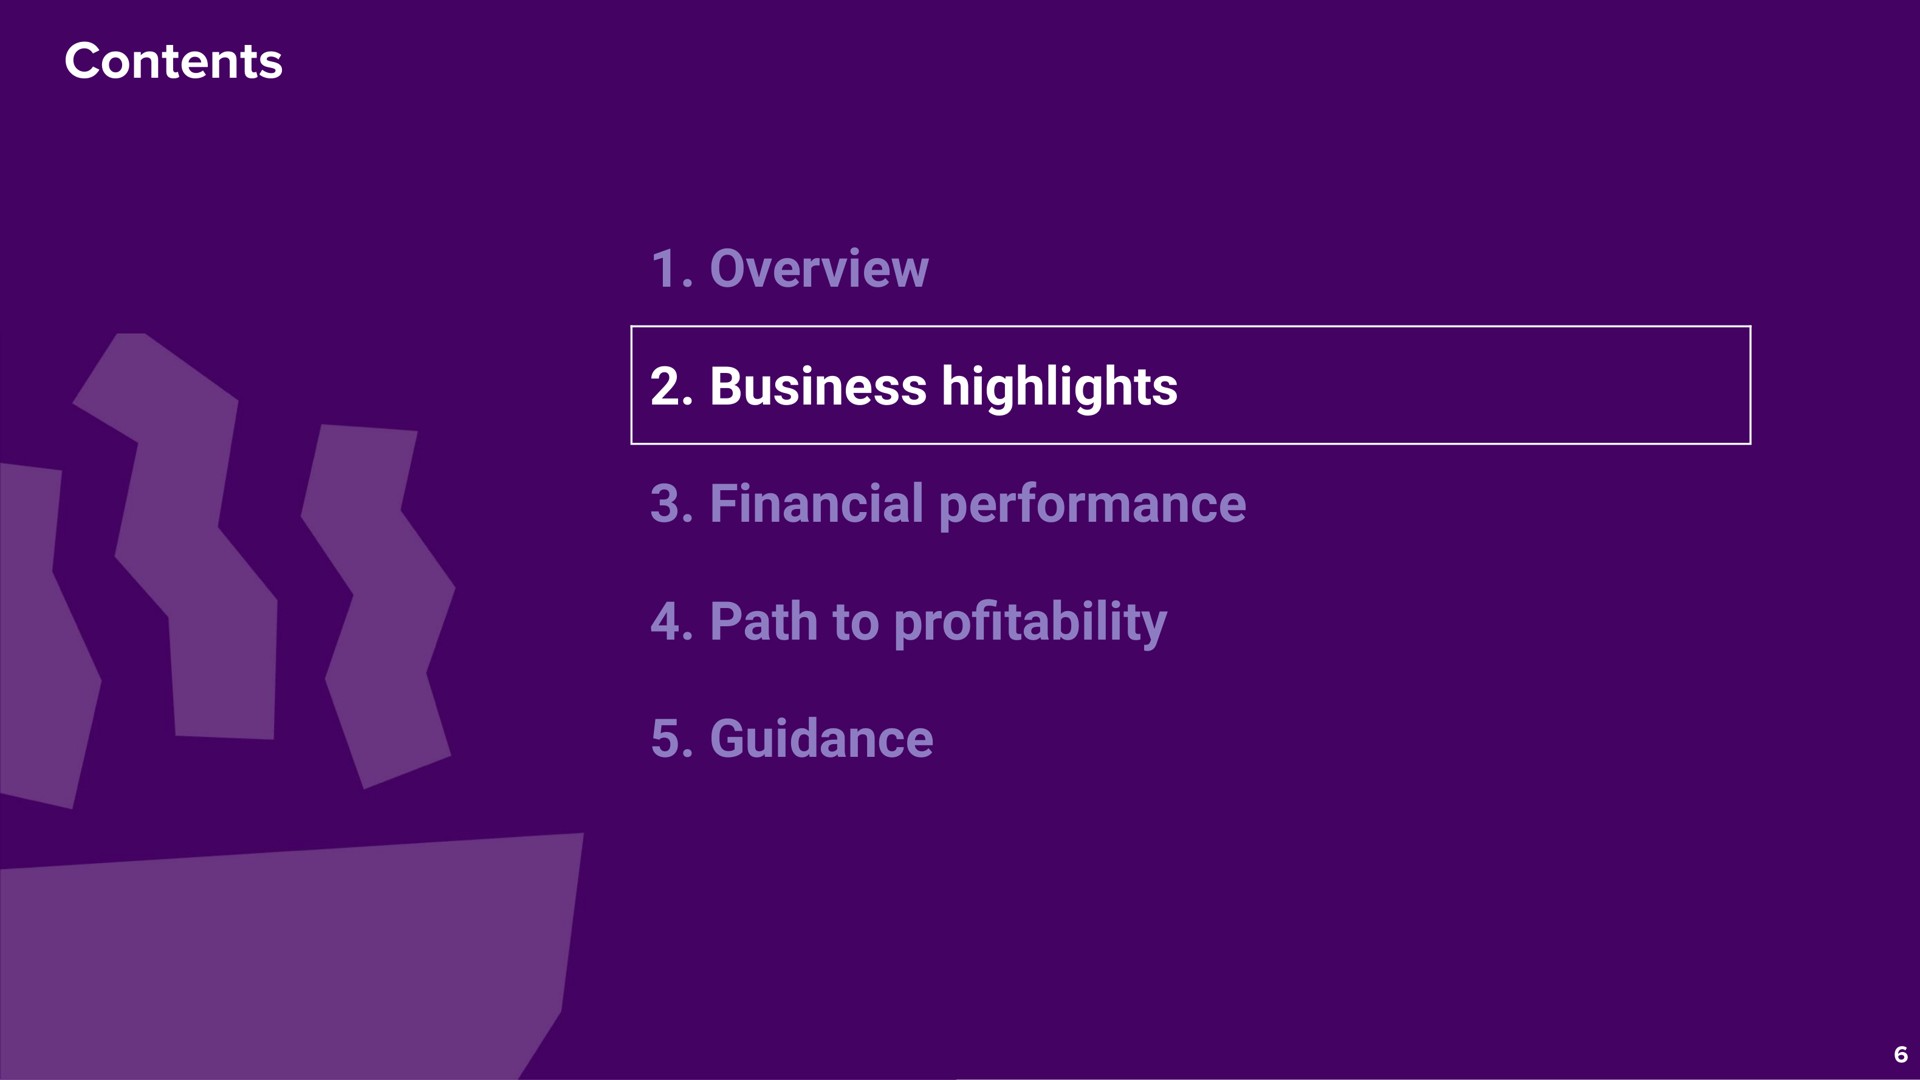 contents overview business highlights financial performance path to pro guidance profitability | Deliveroo